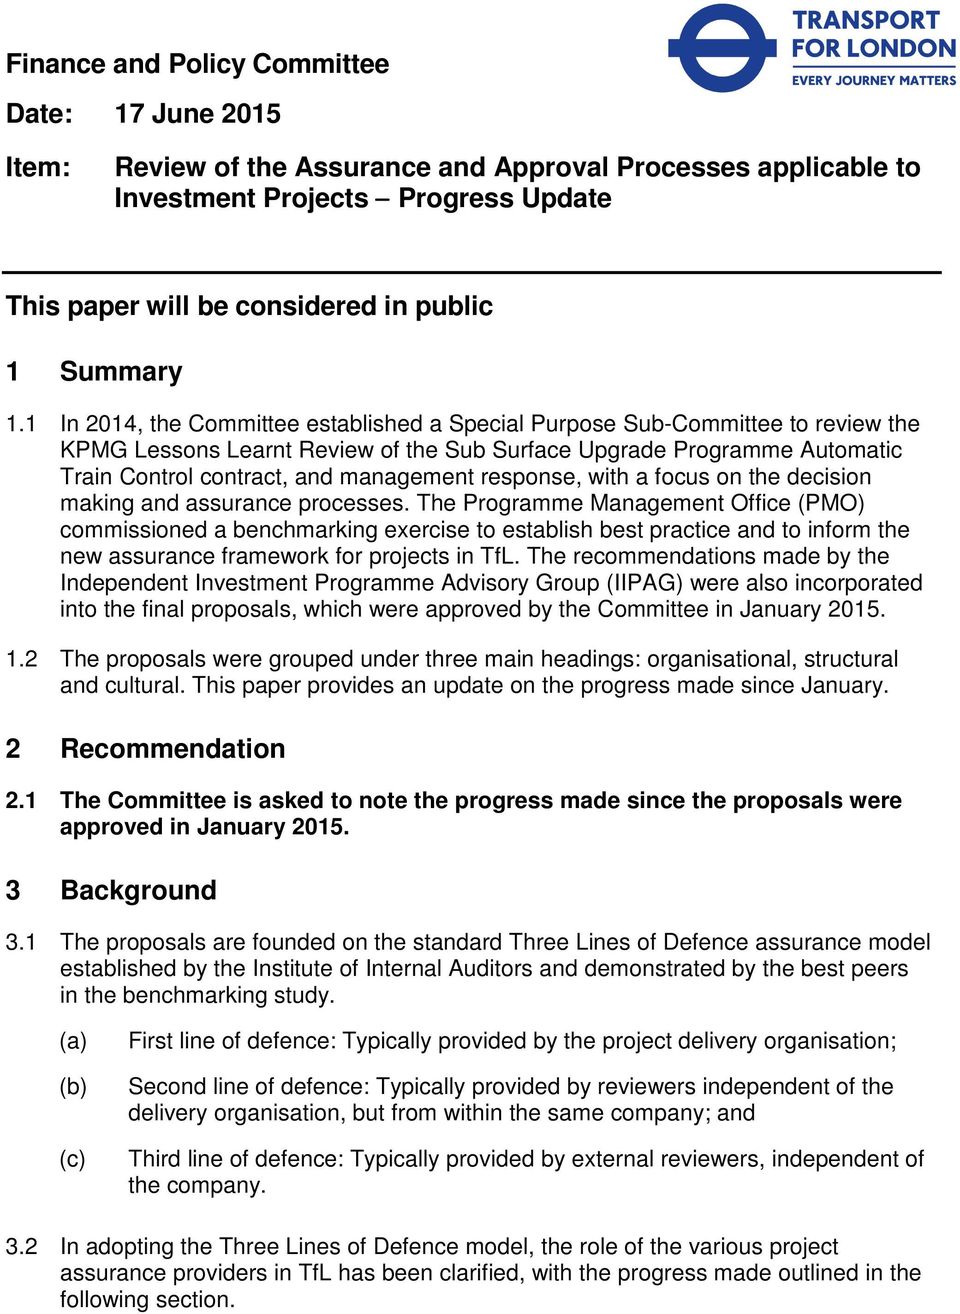 1 In 2014, the Committee established a Special Purpose Sub-Committee to review the KPMG Lessons Learnt Review of the Sub Surface Upgrade Programme Automatic Train Control contract, and management